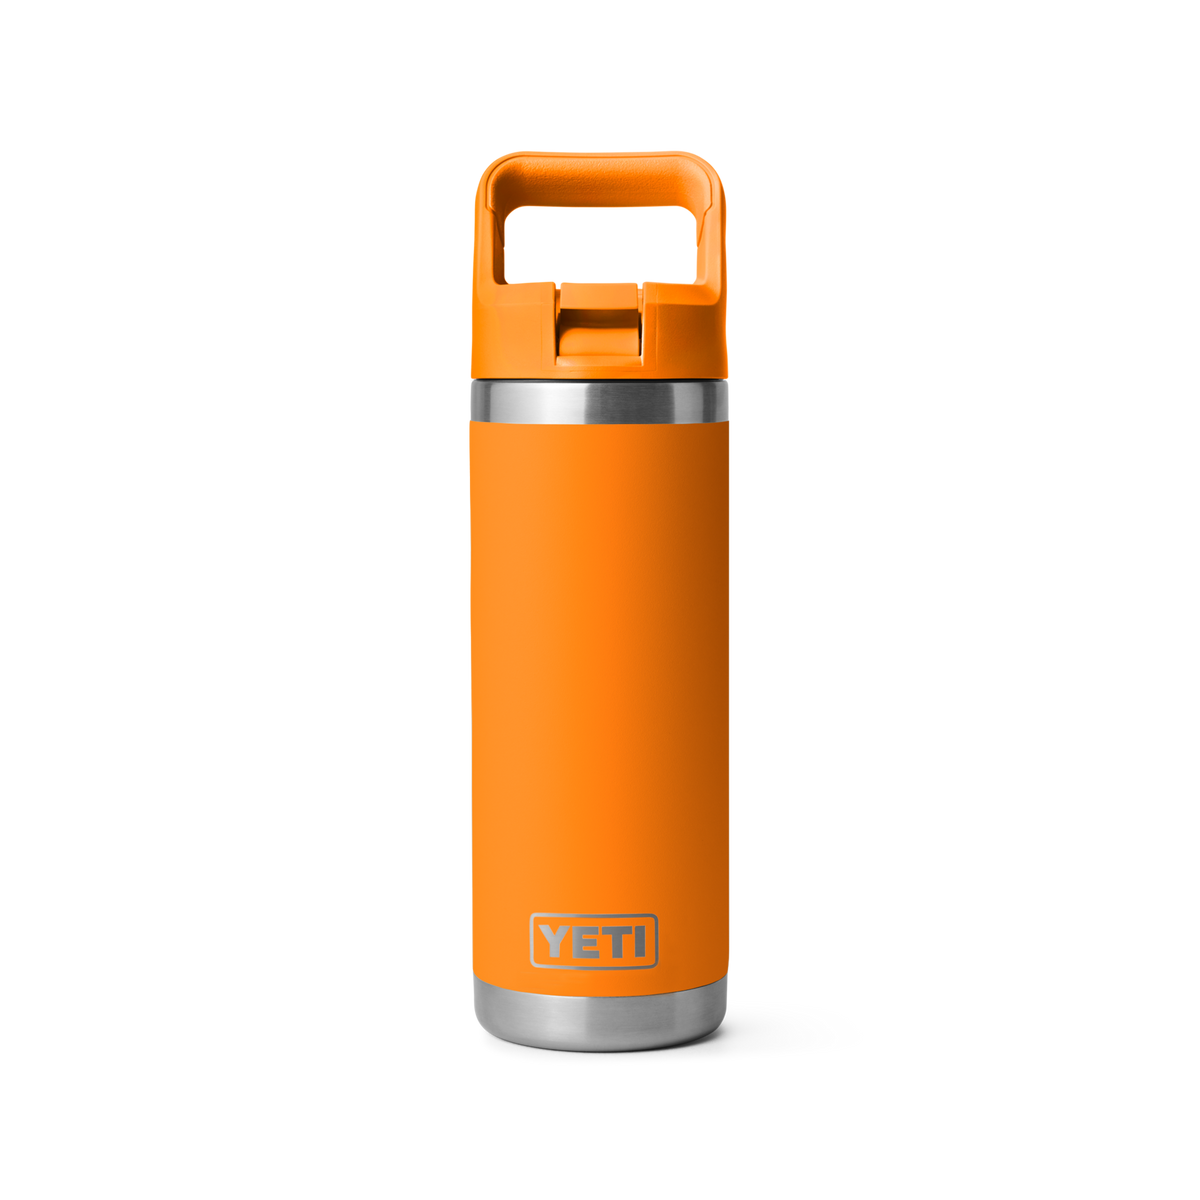 Yeti Rambler 18oz Water Bottle With Color-Matched Straw Cap